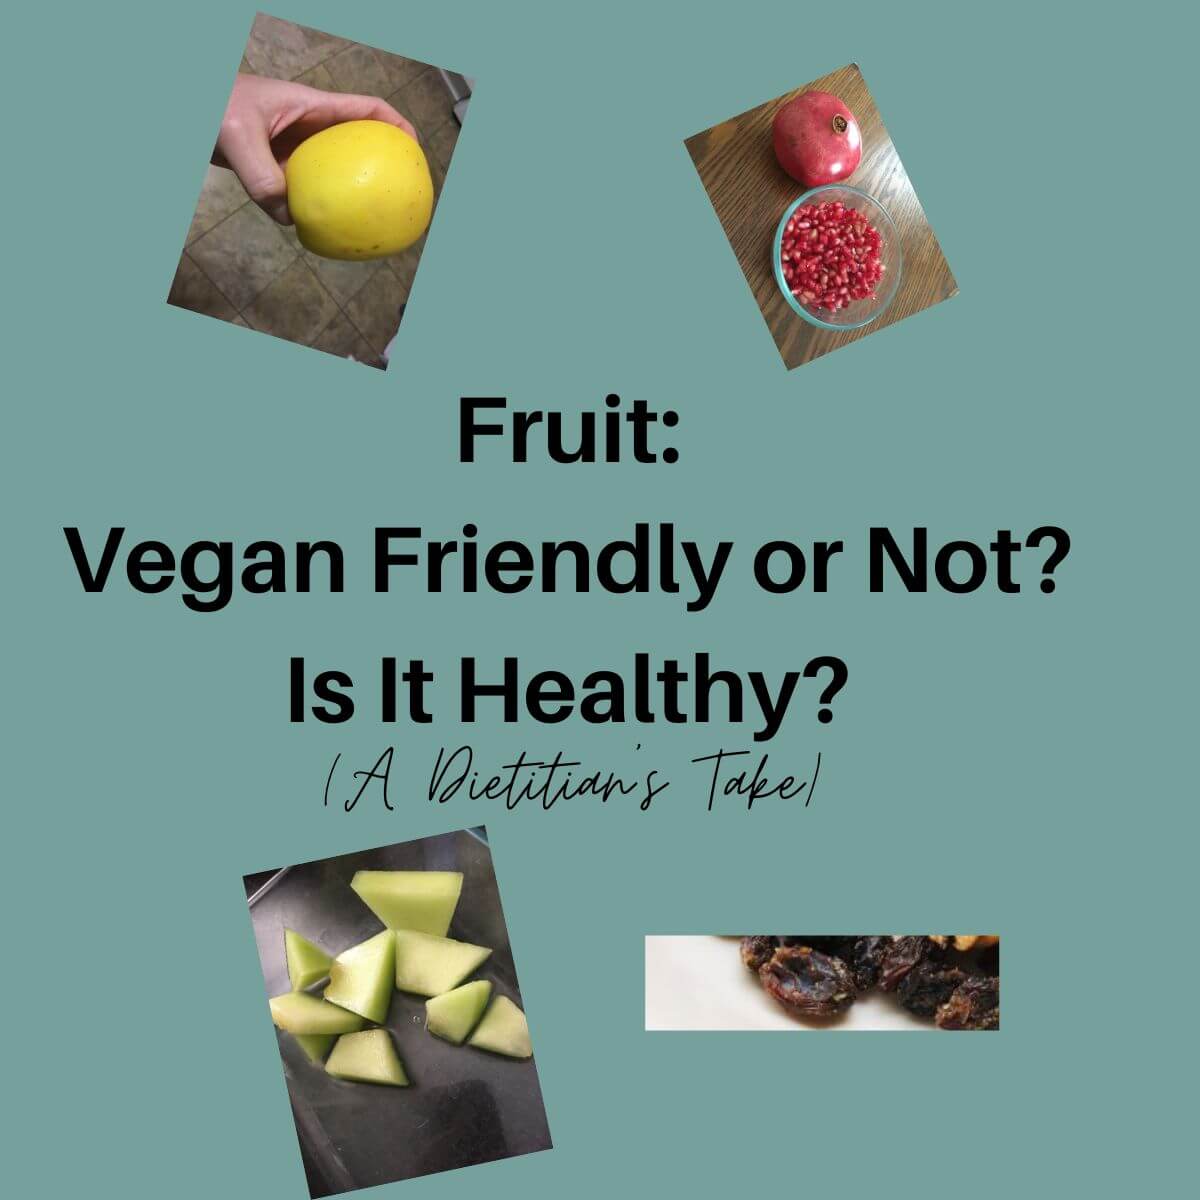 Words read: Fruit Vegan Friendly or Not Is It Healthy (A Dietitian's Take). Pictures include a picture of a hand holding an apple, cut up pieces of melon in a container, raisins, and a whole pomegranate fruit next to a pomegranate seeds in a glass container.